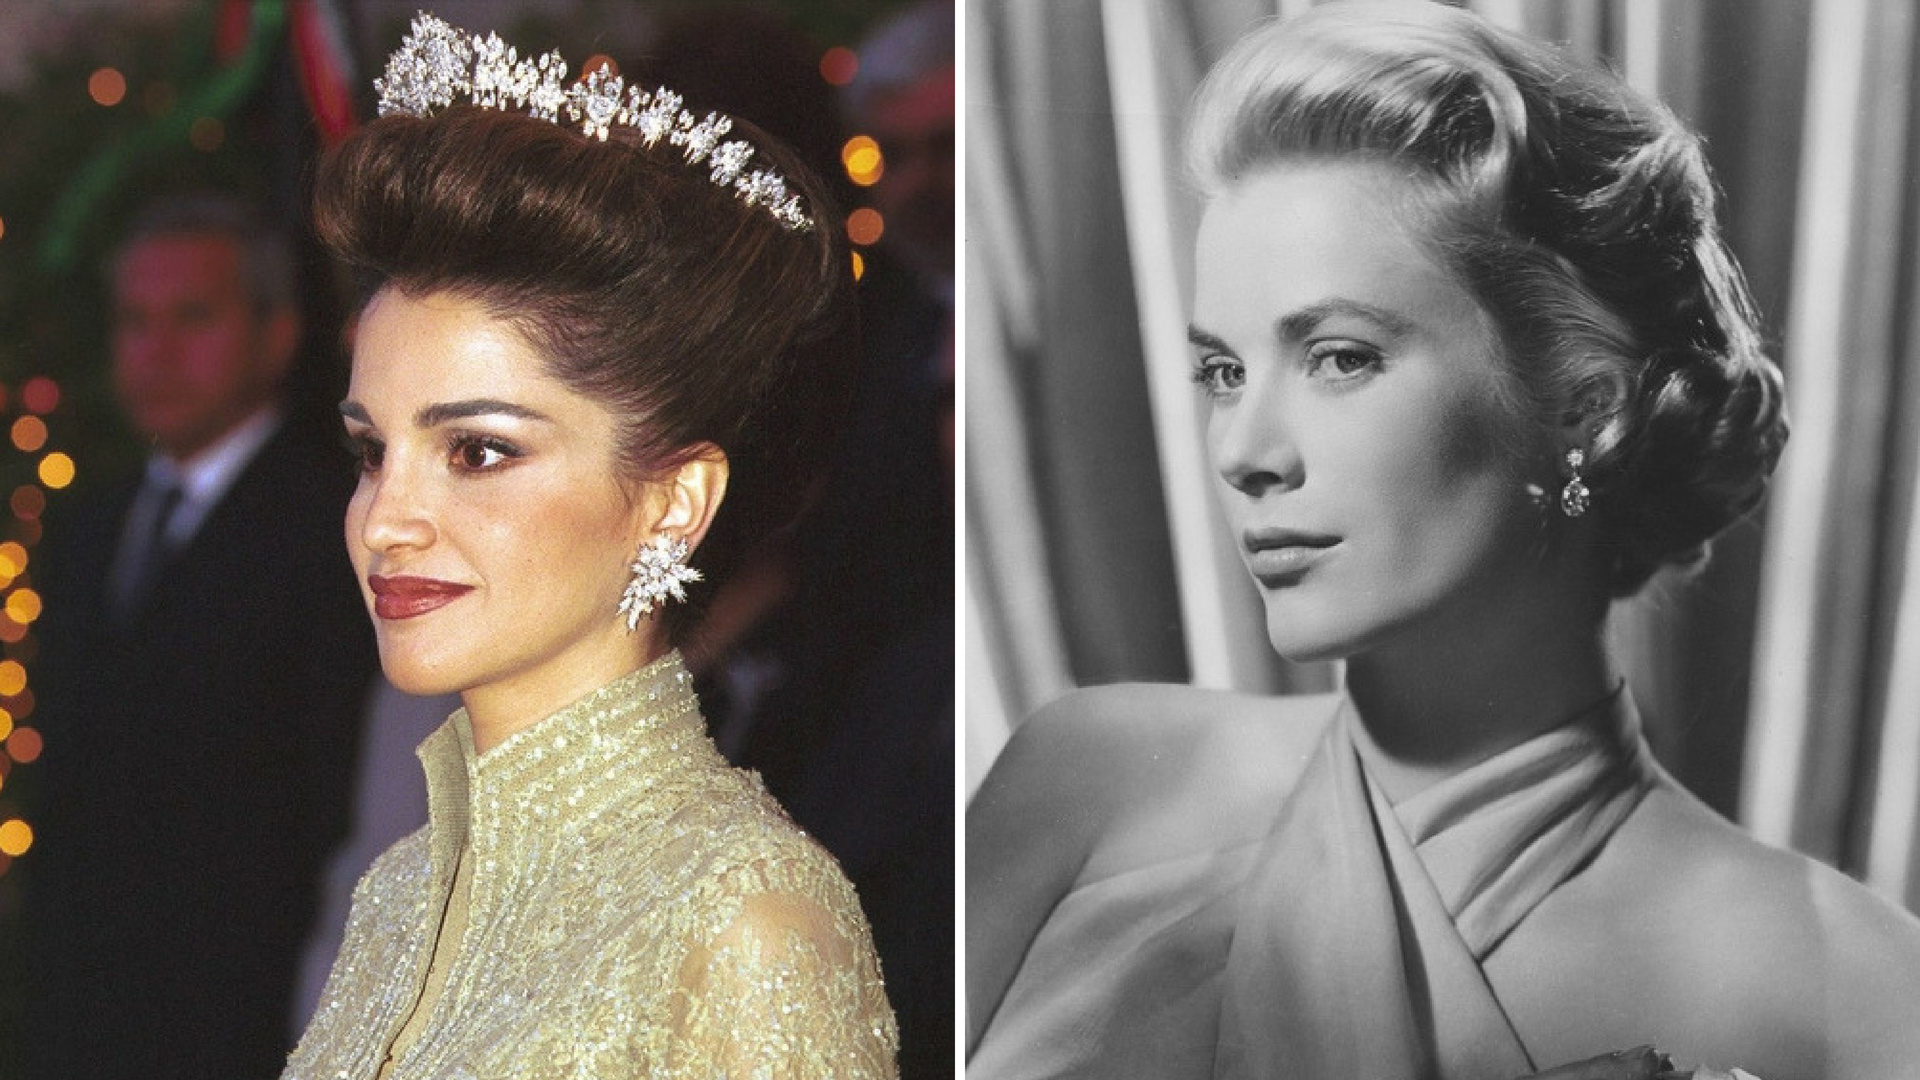 Netflixs The Crown The most regal hairstyles from the show